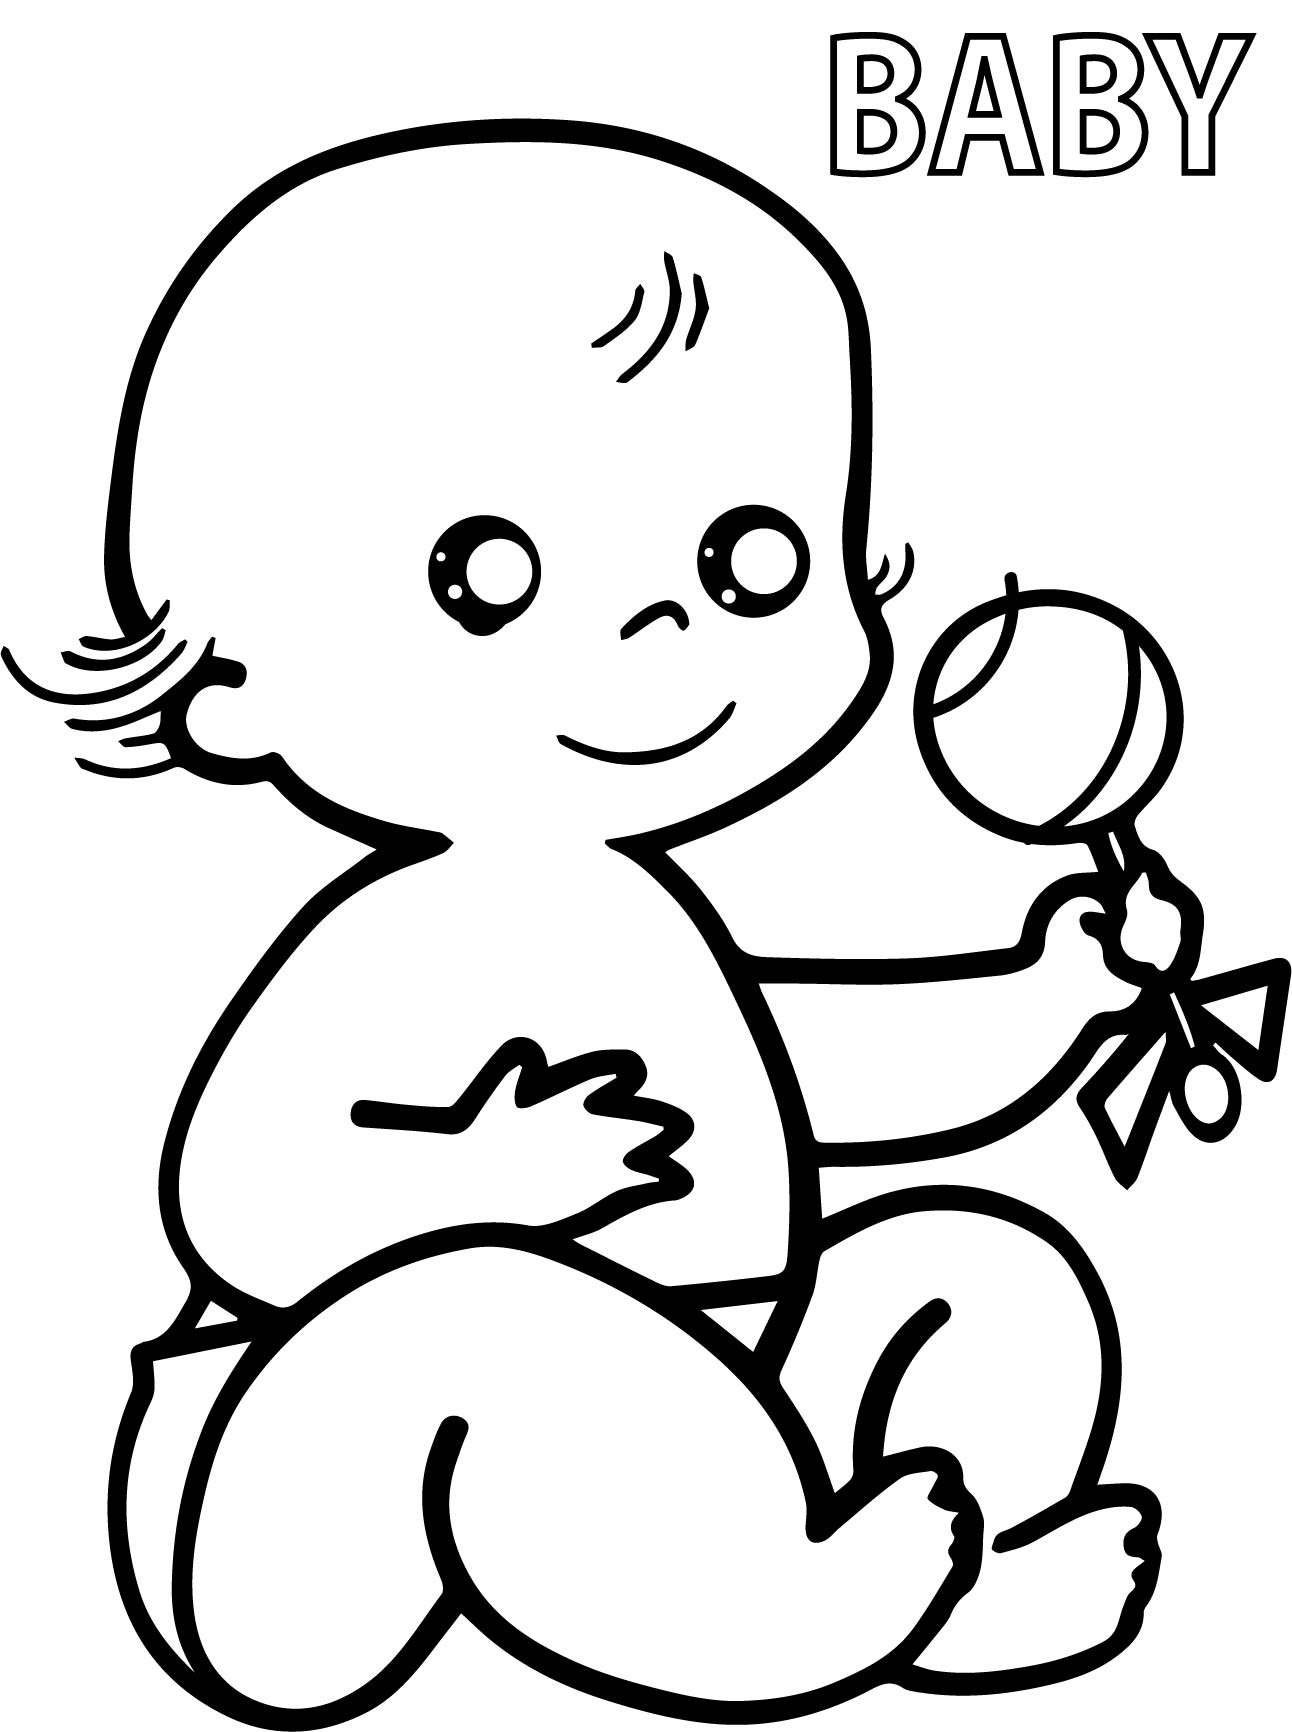 Coloring Page Baby
 Preschool Baby Coloring Pages